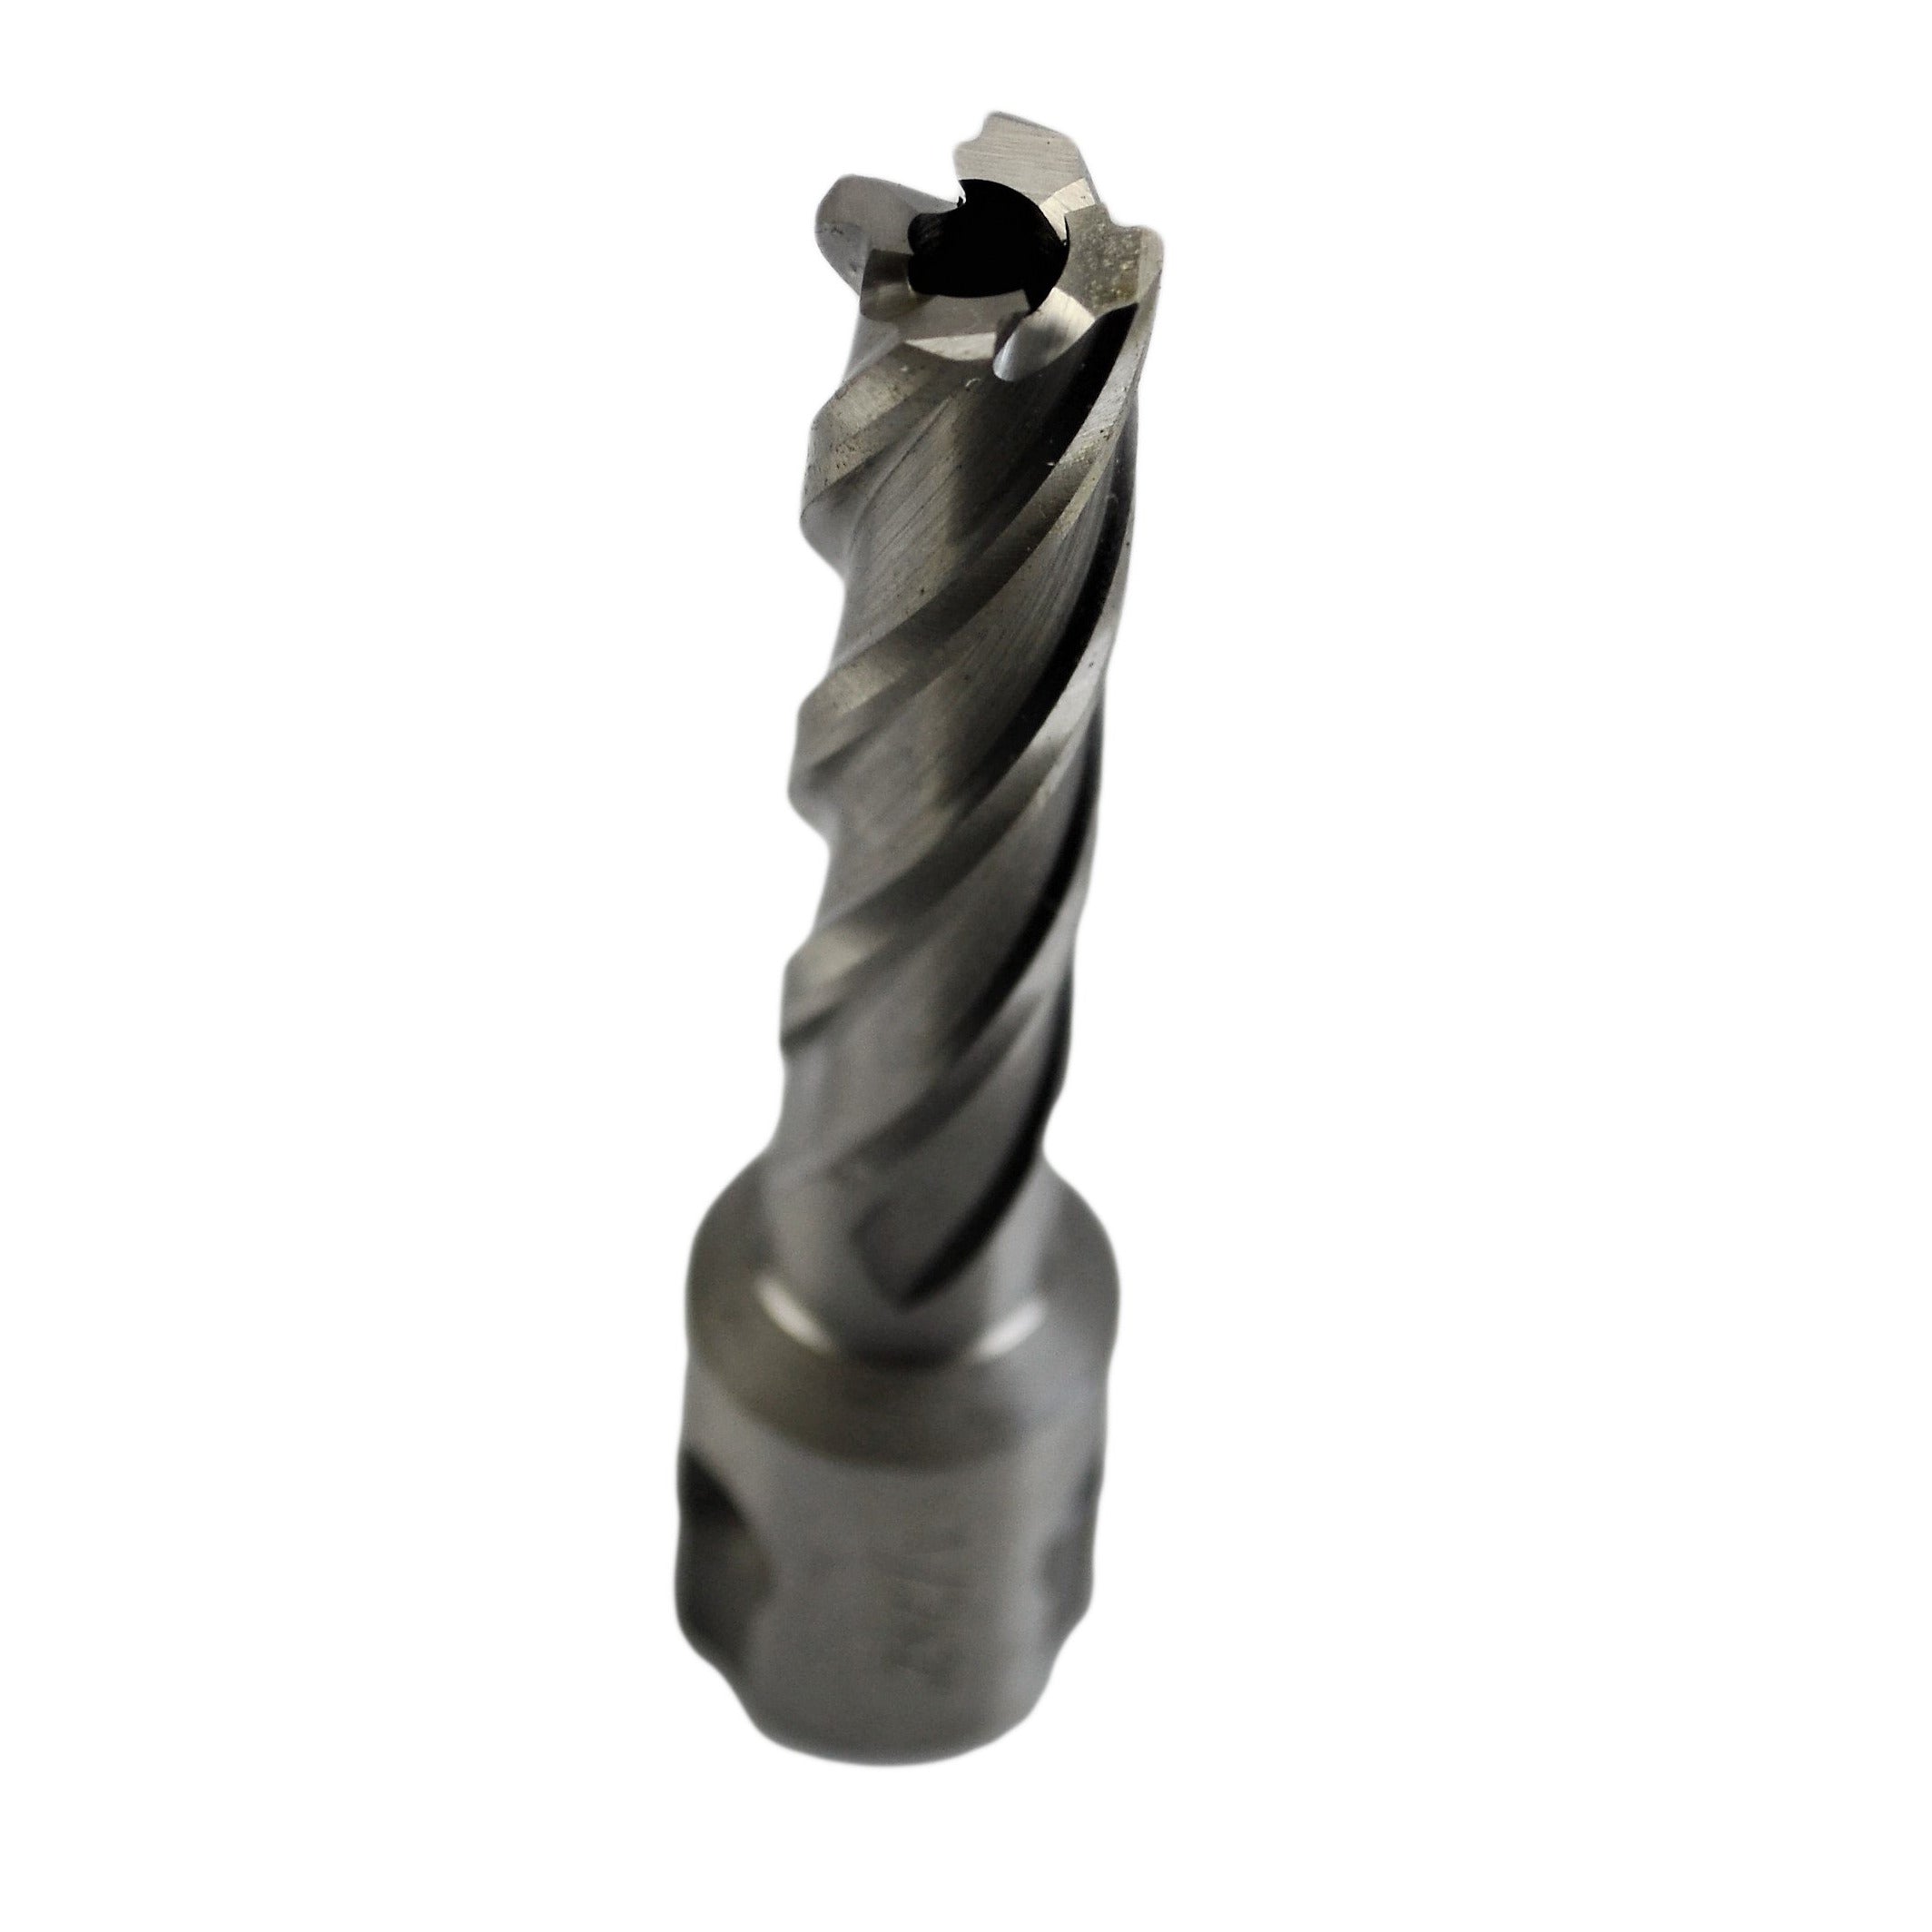  1/2” x  2” -  Annular Cutter - HSS  Made From Quality High Speed Steel.   Drilling Size: 1/2”  Drilling Depth: 2”  Overall Length Including Shank: 87 mm  Overall Length Excluding Shank: 62 mm  Shank Size: Ø19 mm  Pin Size: 6.35 mm  Flutes: 4   Made from high speed tool steel, our 1/2" x 2"  drill bit will quickly and safely cut holes in steel. The size of each cutter is etched on the shaft. This cutter has a 2” cutting depth and ¾” Weldon shank. Harlingen annular cutters are the solution to your high toler